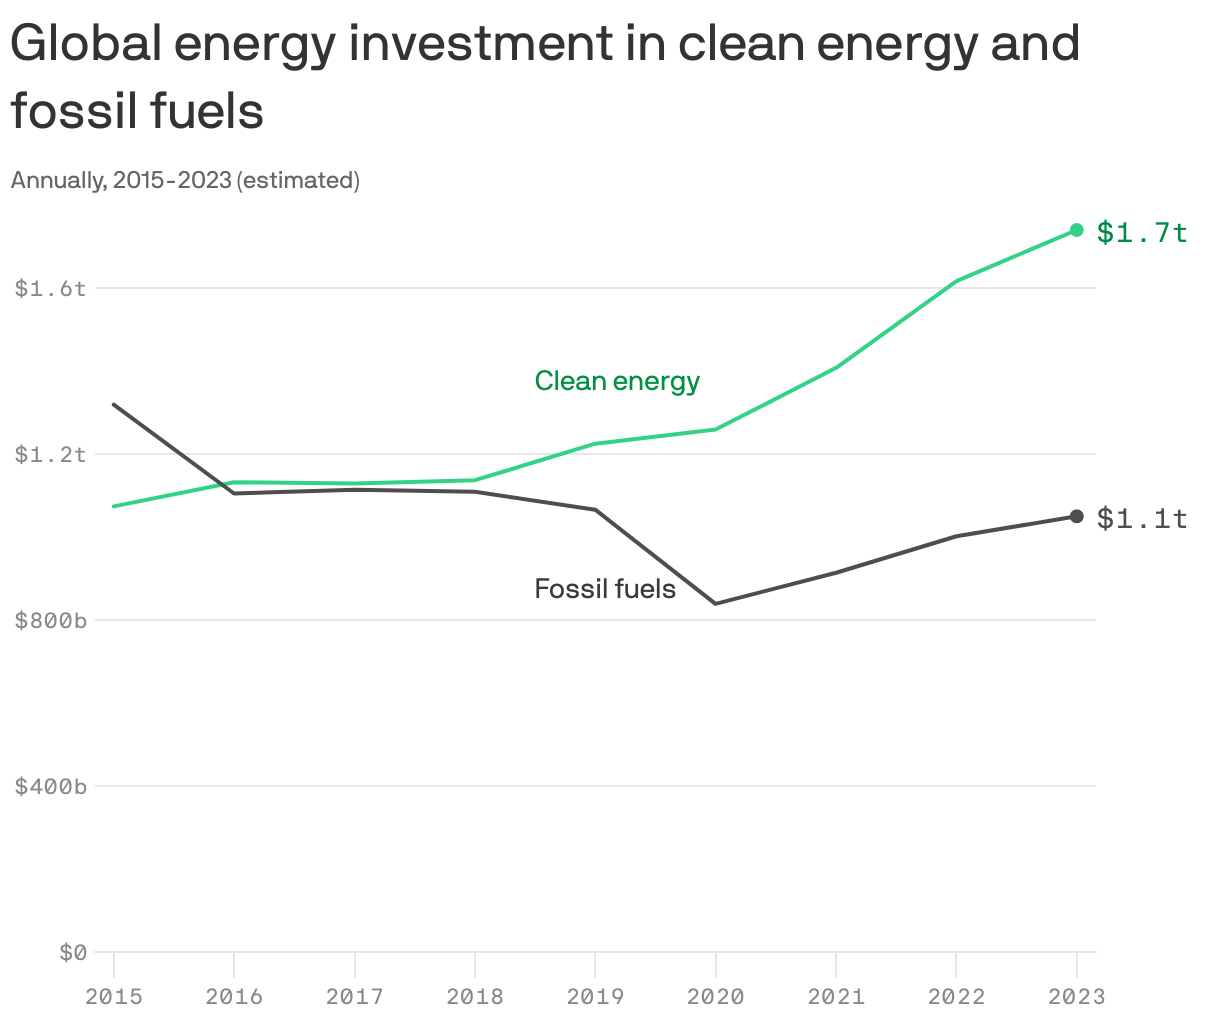 Global energy investment in clean energy and fossil fuels